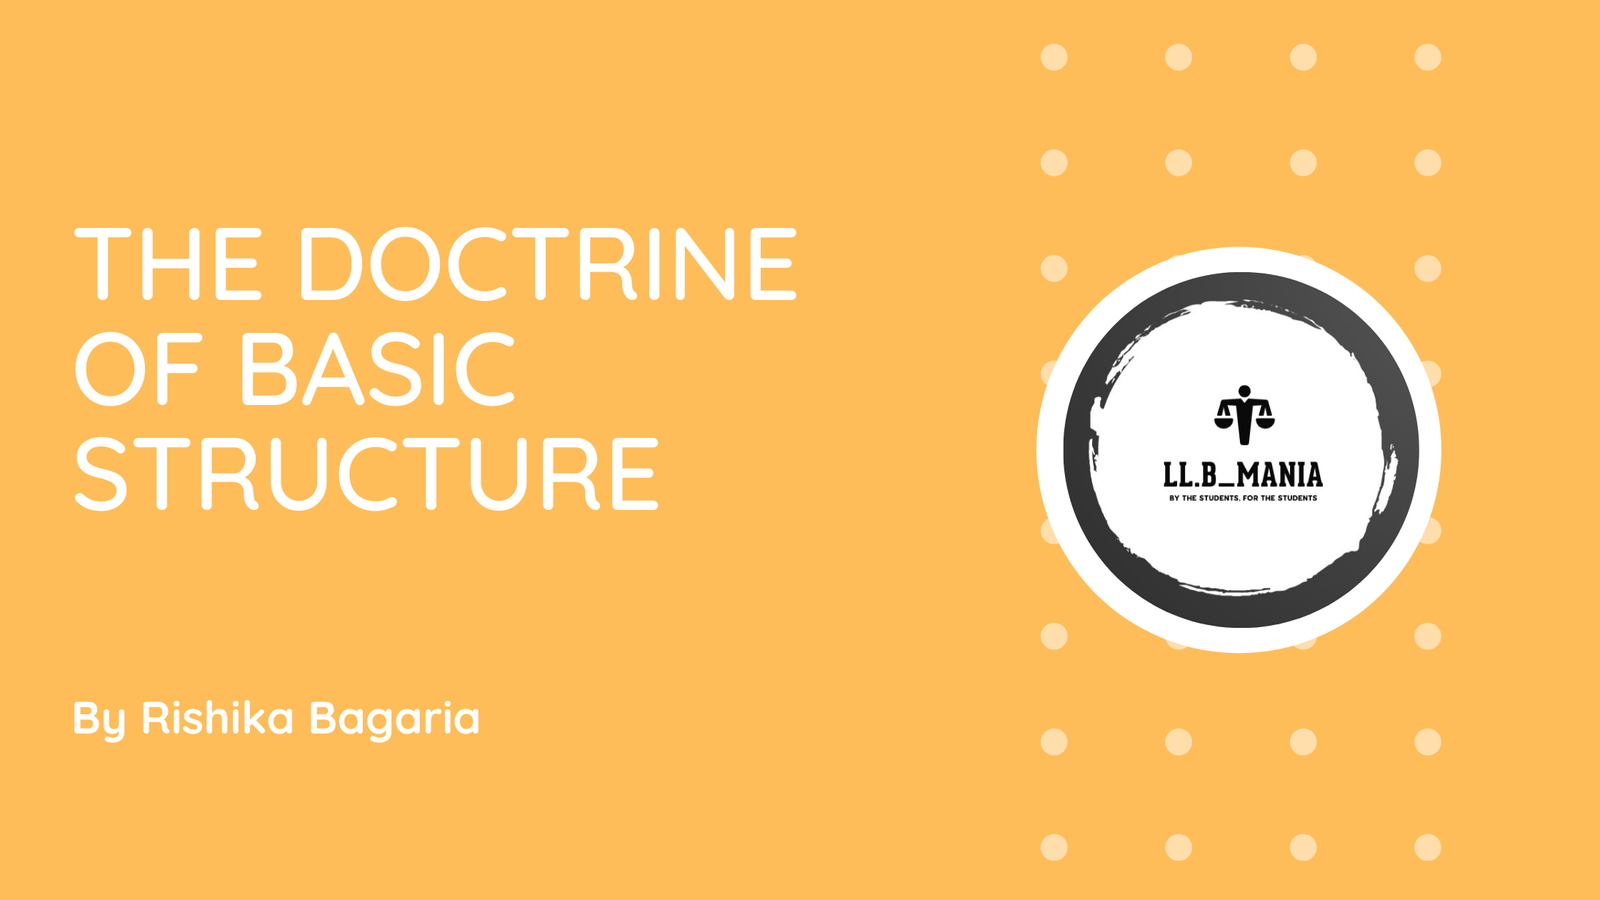 The Doctrine of Basic Structure